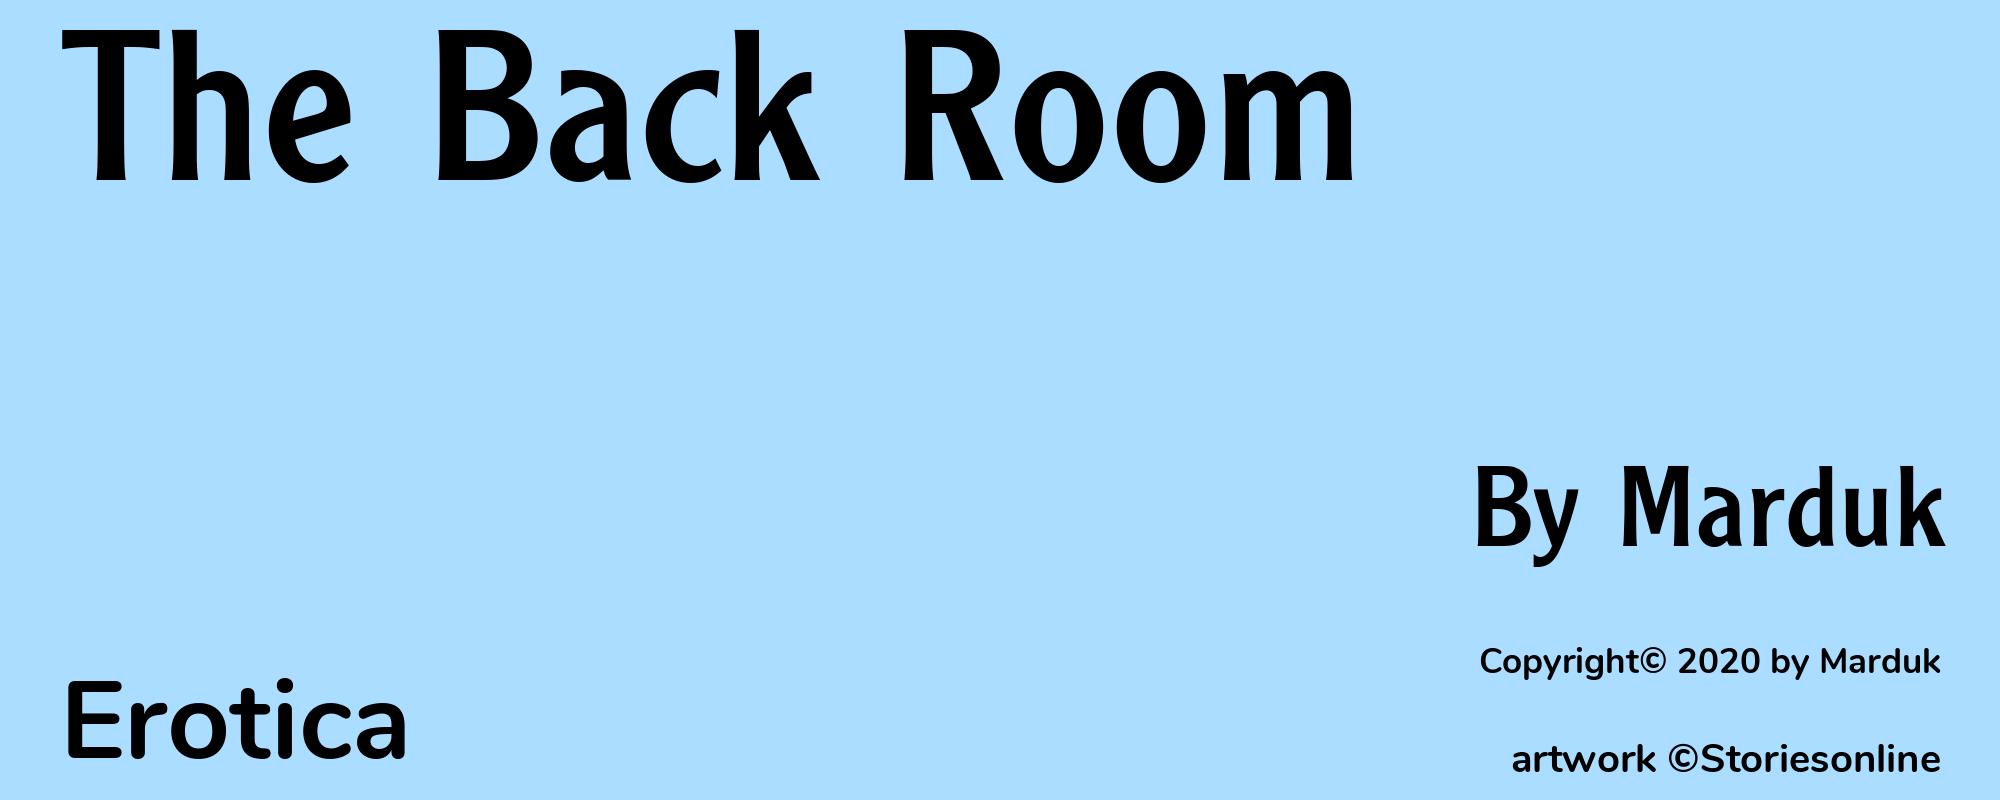 The Back Room - Cover